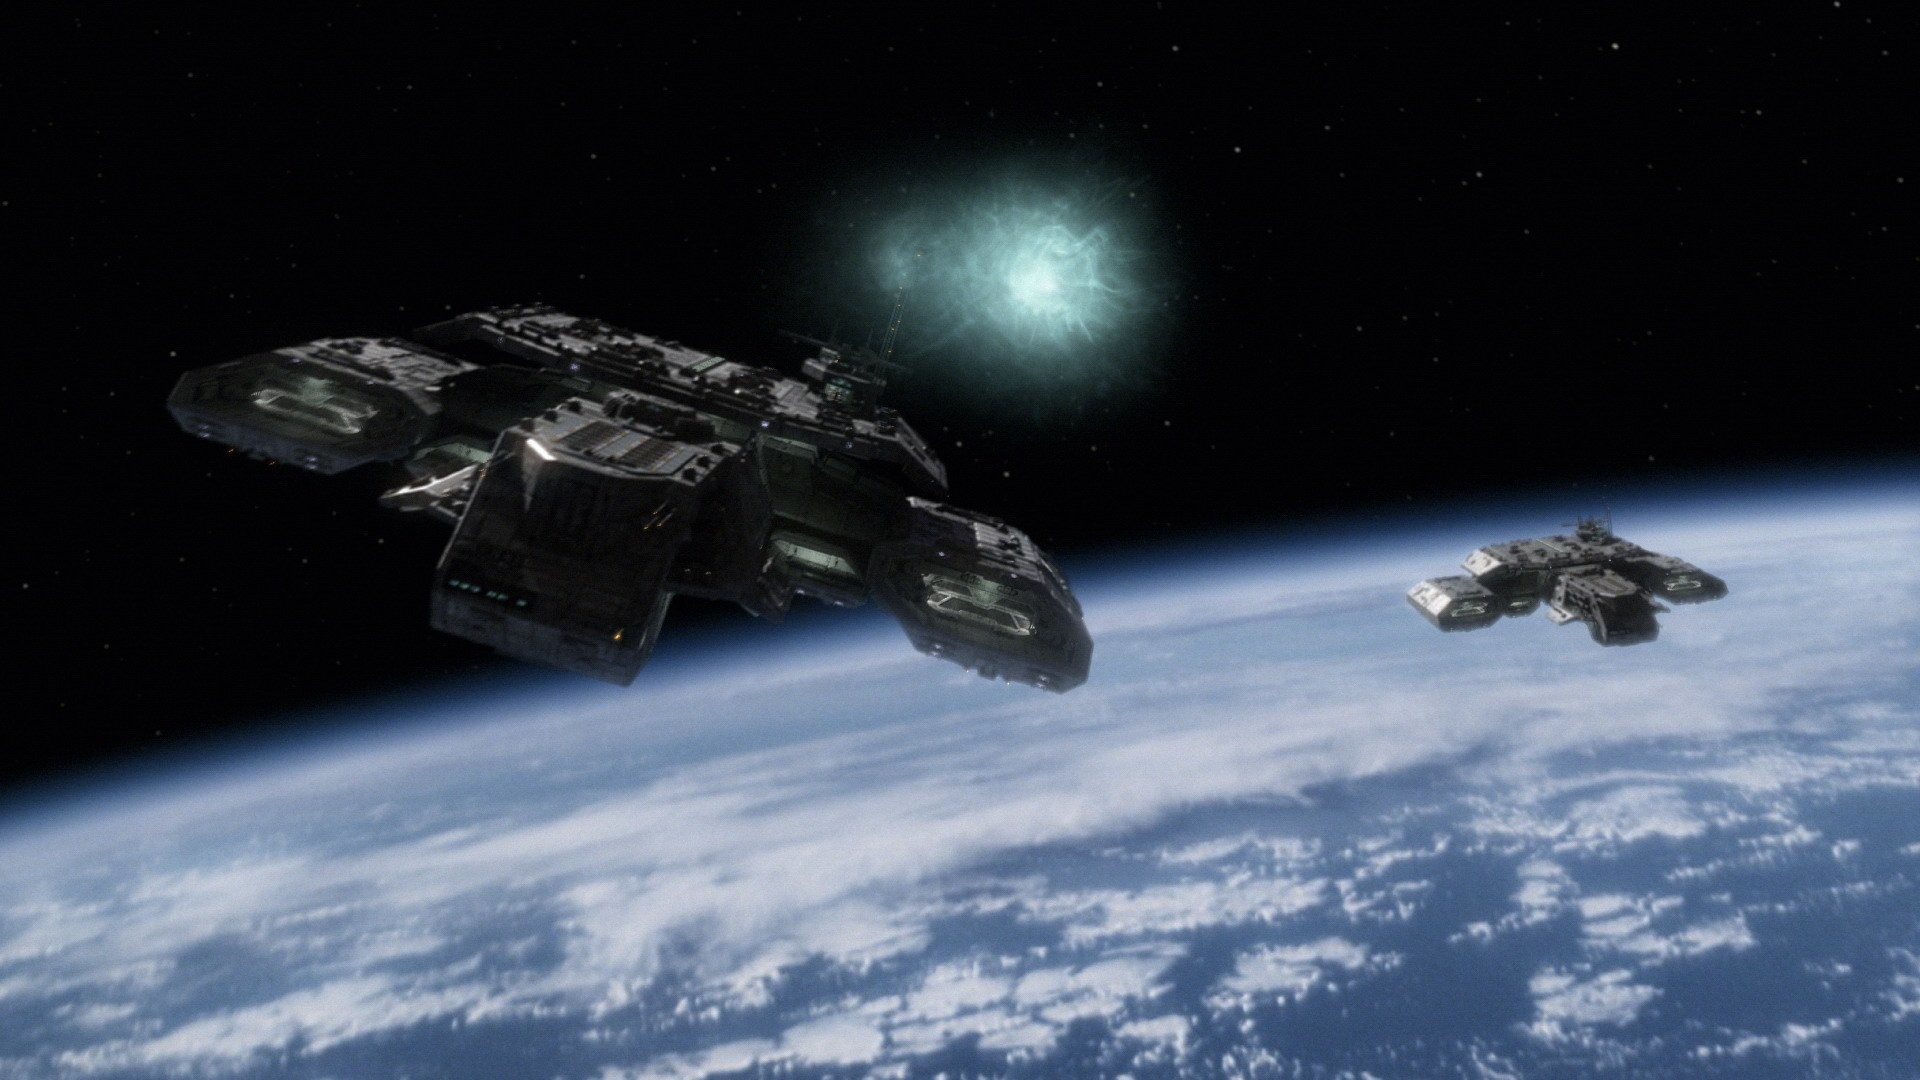 1920x1080 Outer space stars deadalus Stargate SG-1 hyperspace wallpaper |  |  301255 | WallpaperUP